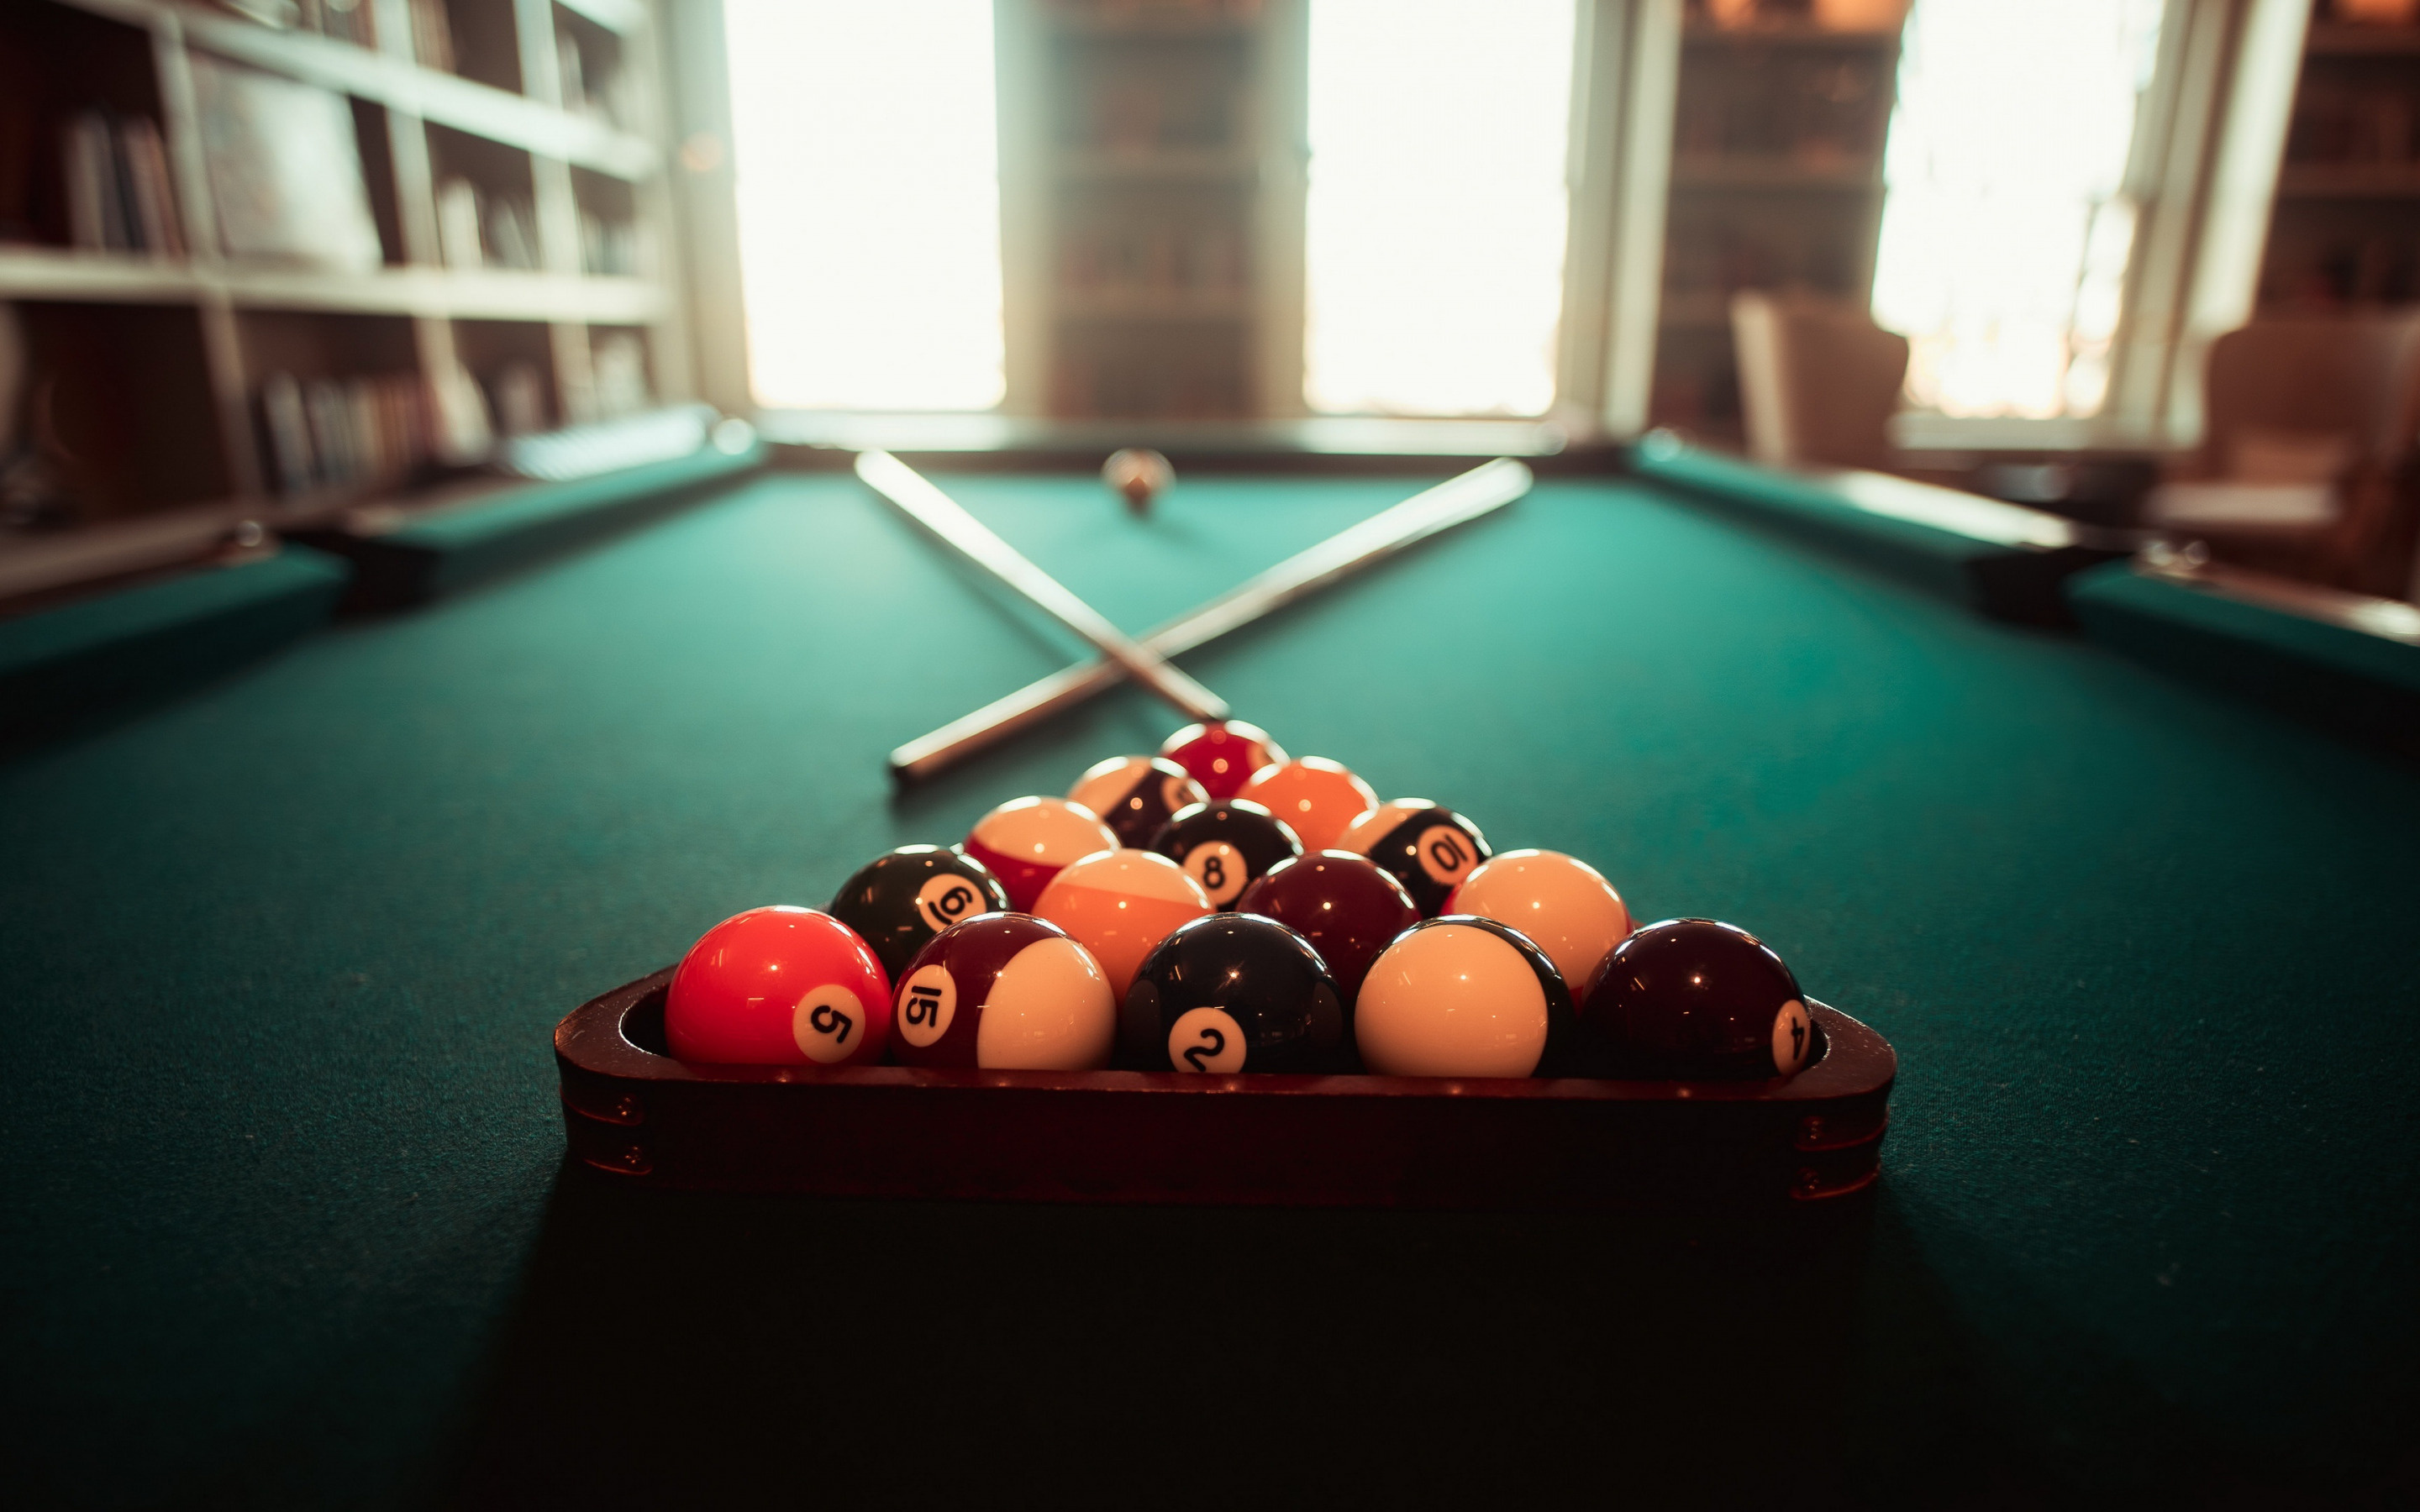 Billiards: Billiard room, Eight-ball, The most common style of cue sports played around the world by professionals. 2880x1800 HD Background.